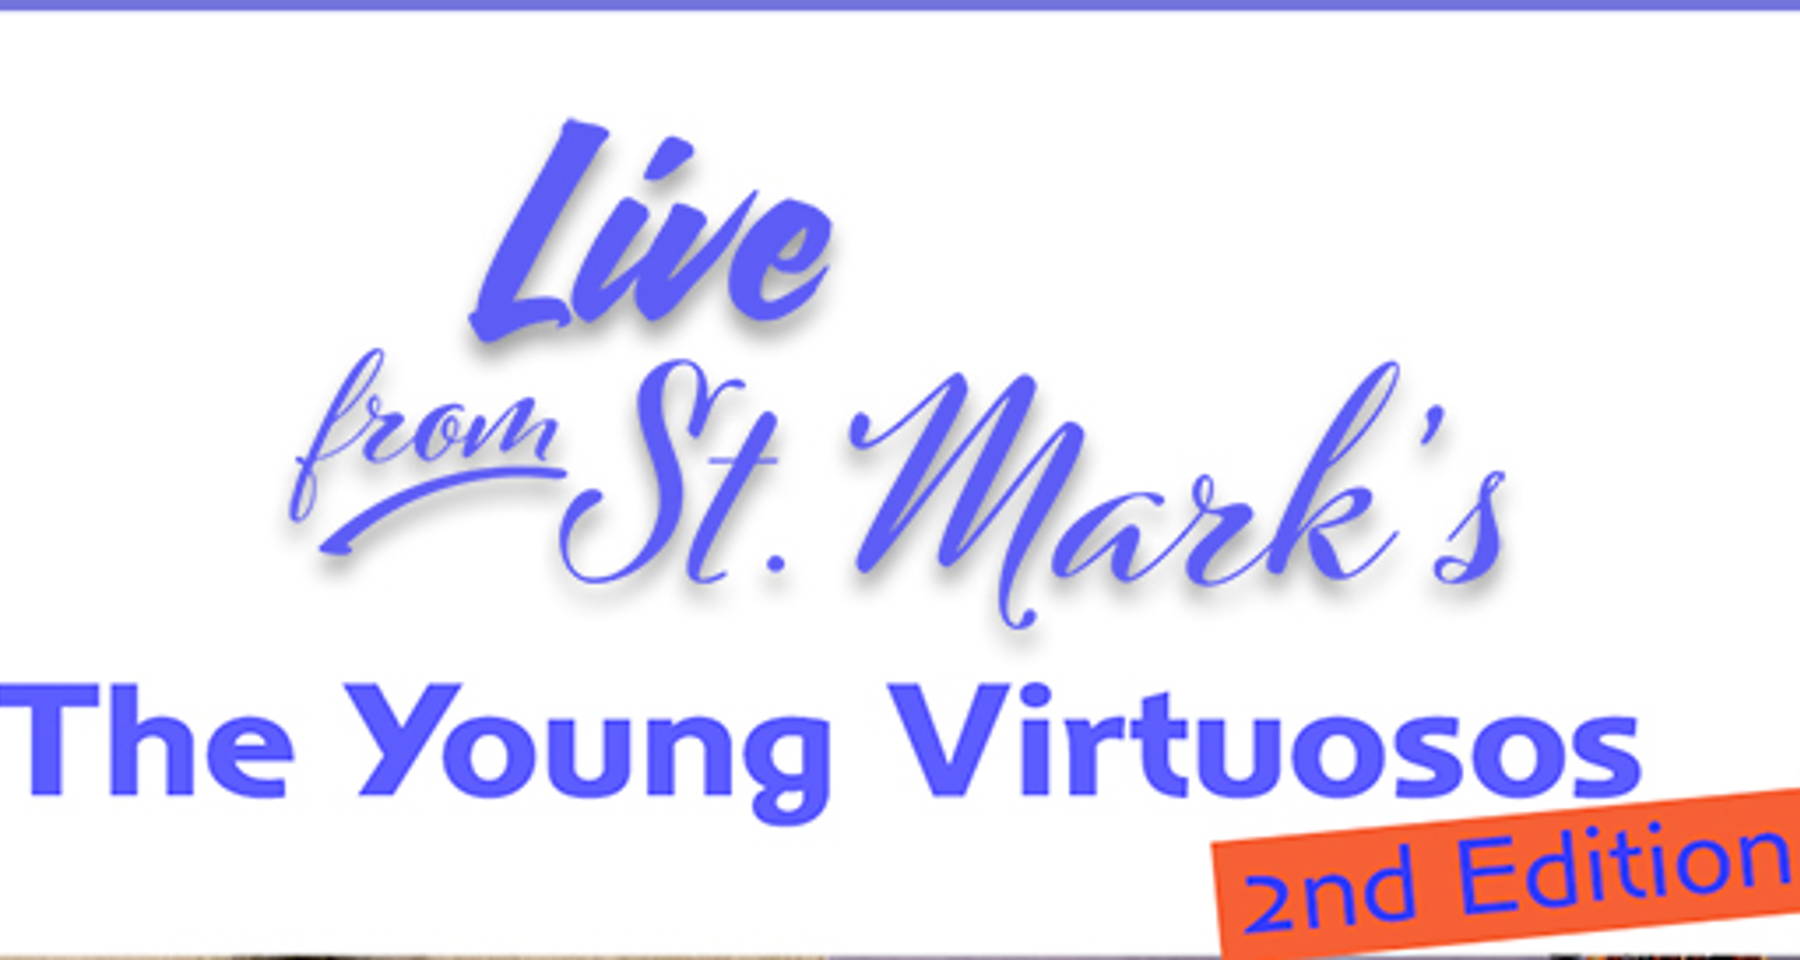 Omni Foundation for the Performing Arts Presents: The Young Virtuosos, 2nd Edition